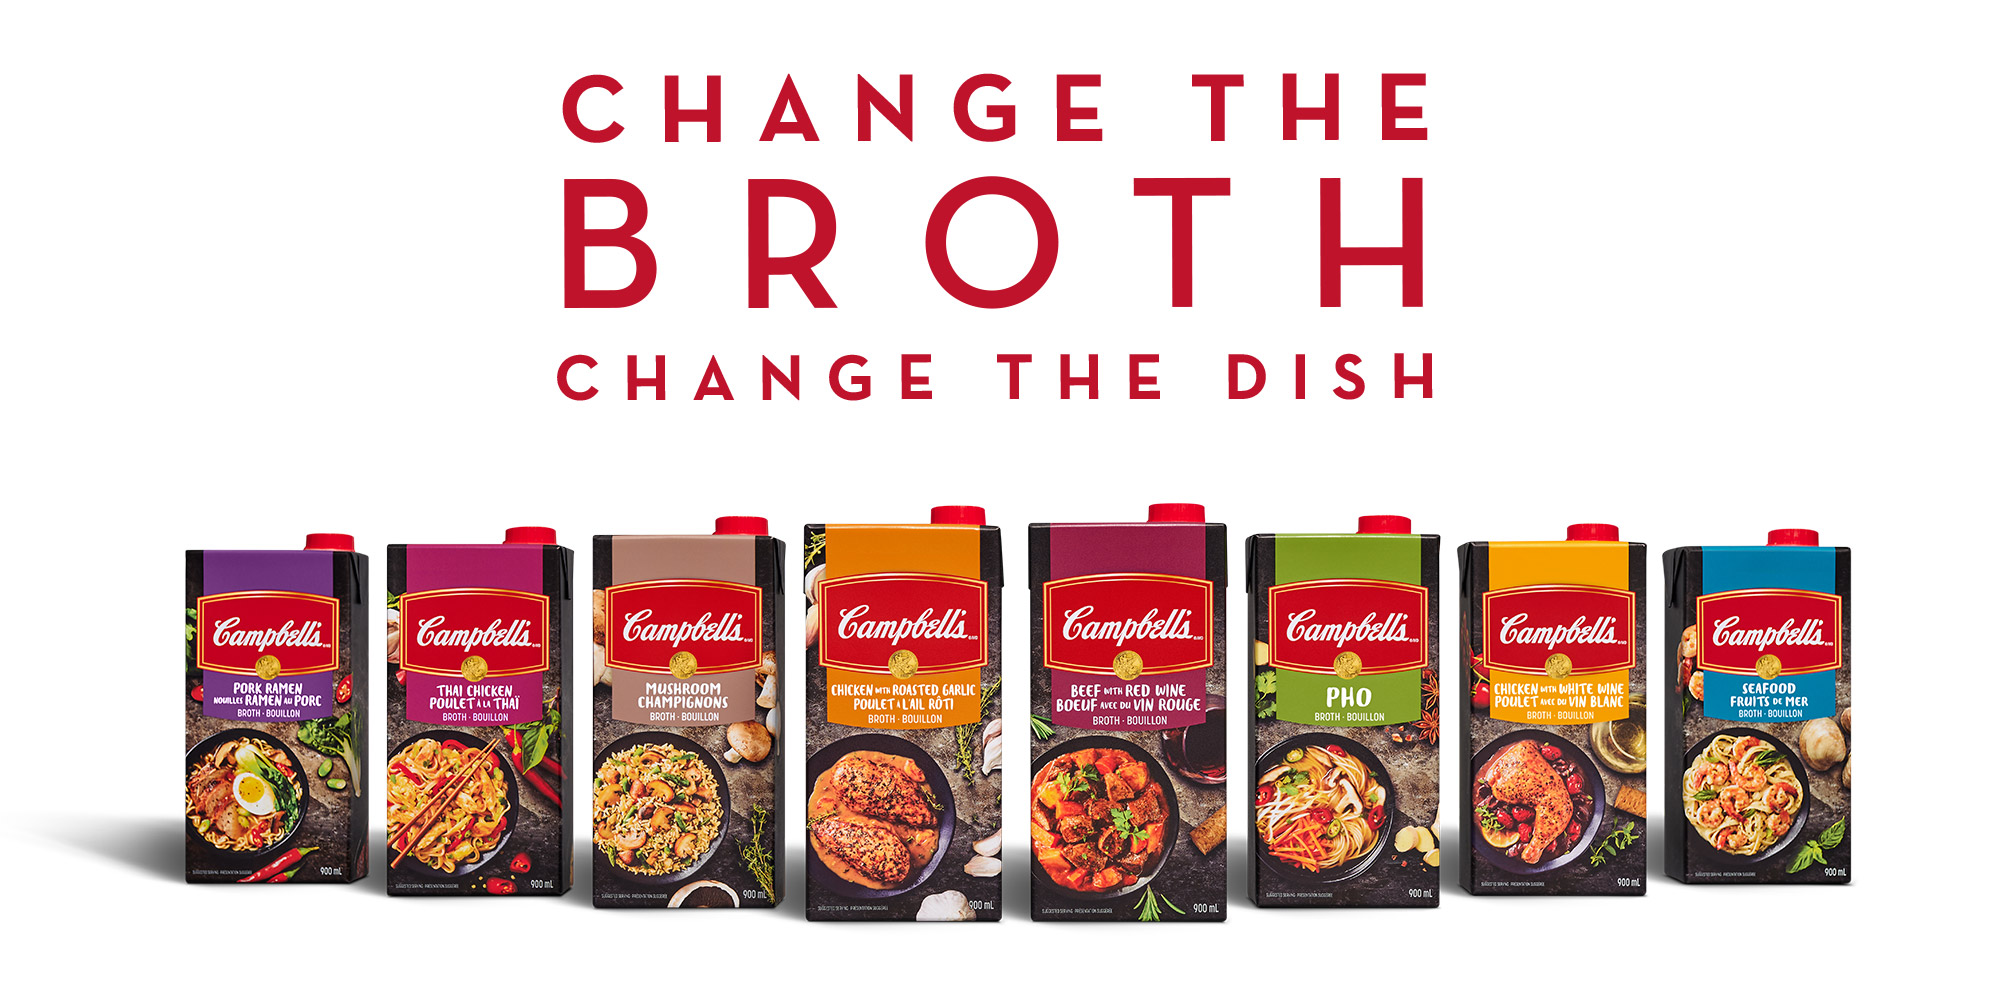 Change the Broth. Change the Dish. Campbell's Broth Packages.